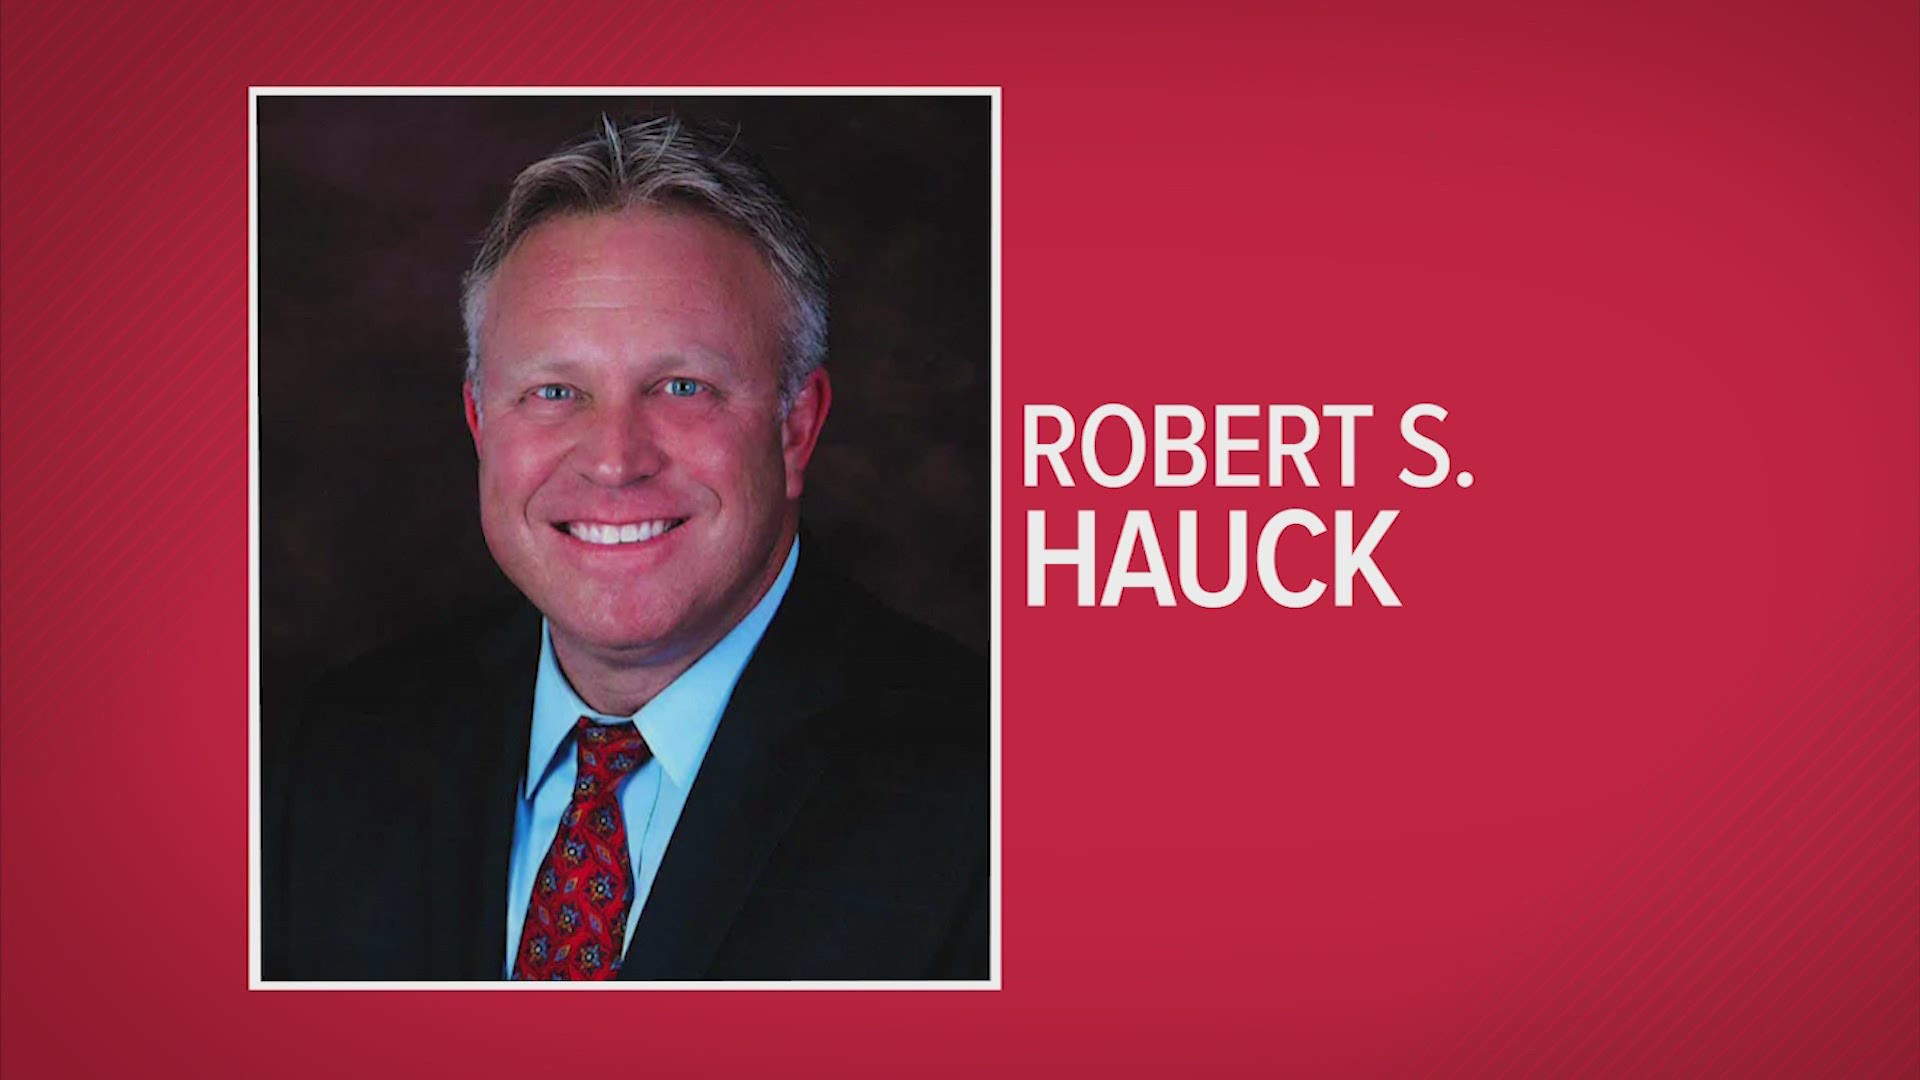 Robert S. Hauck, Tomball’s city manager, was killed Saturday in a single-vehicle crash in Waller County.